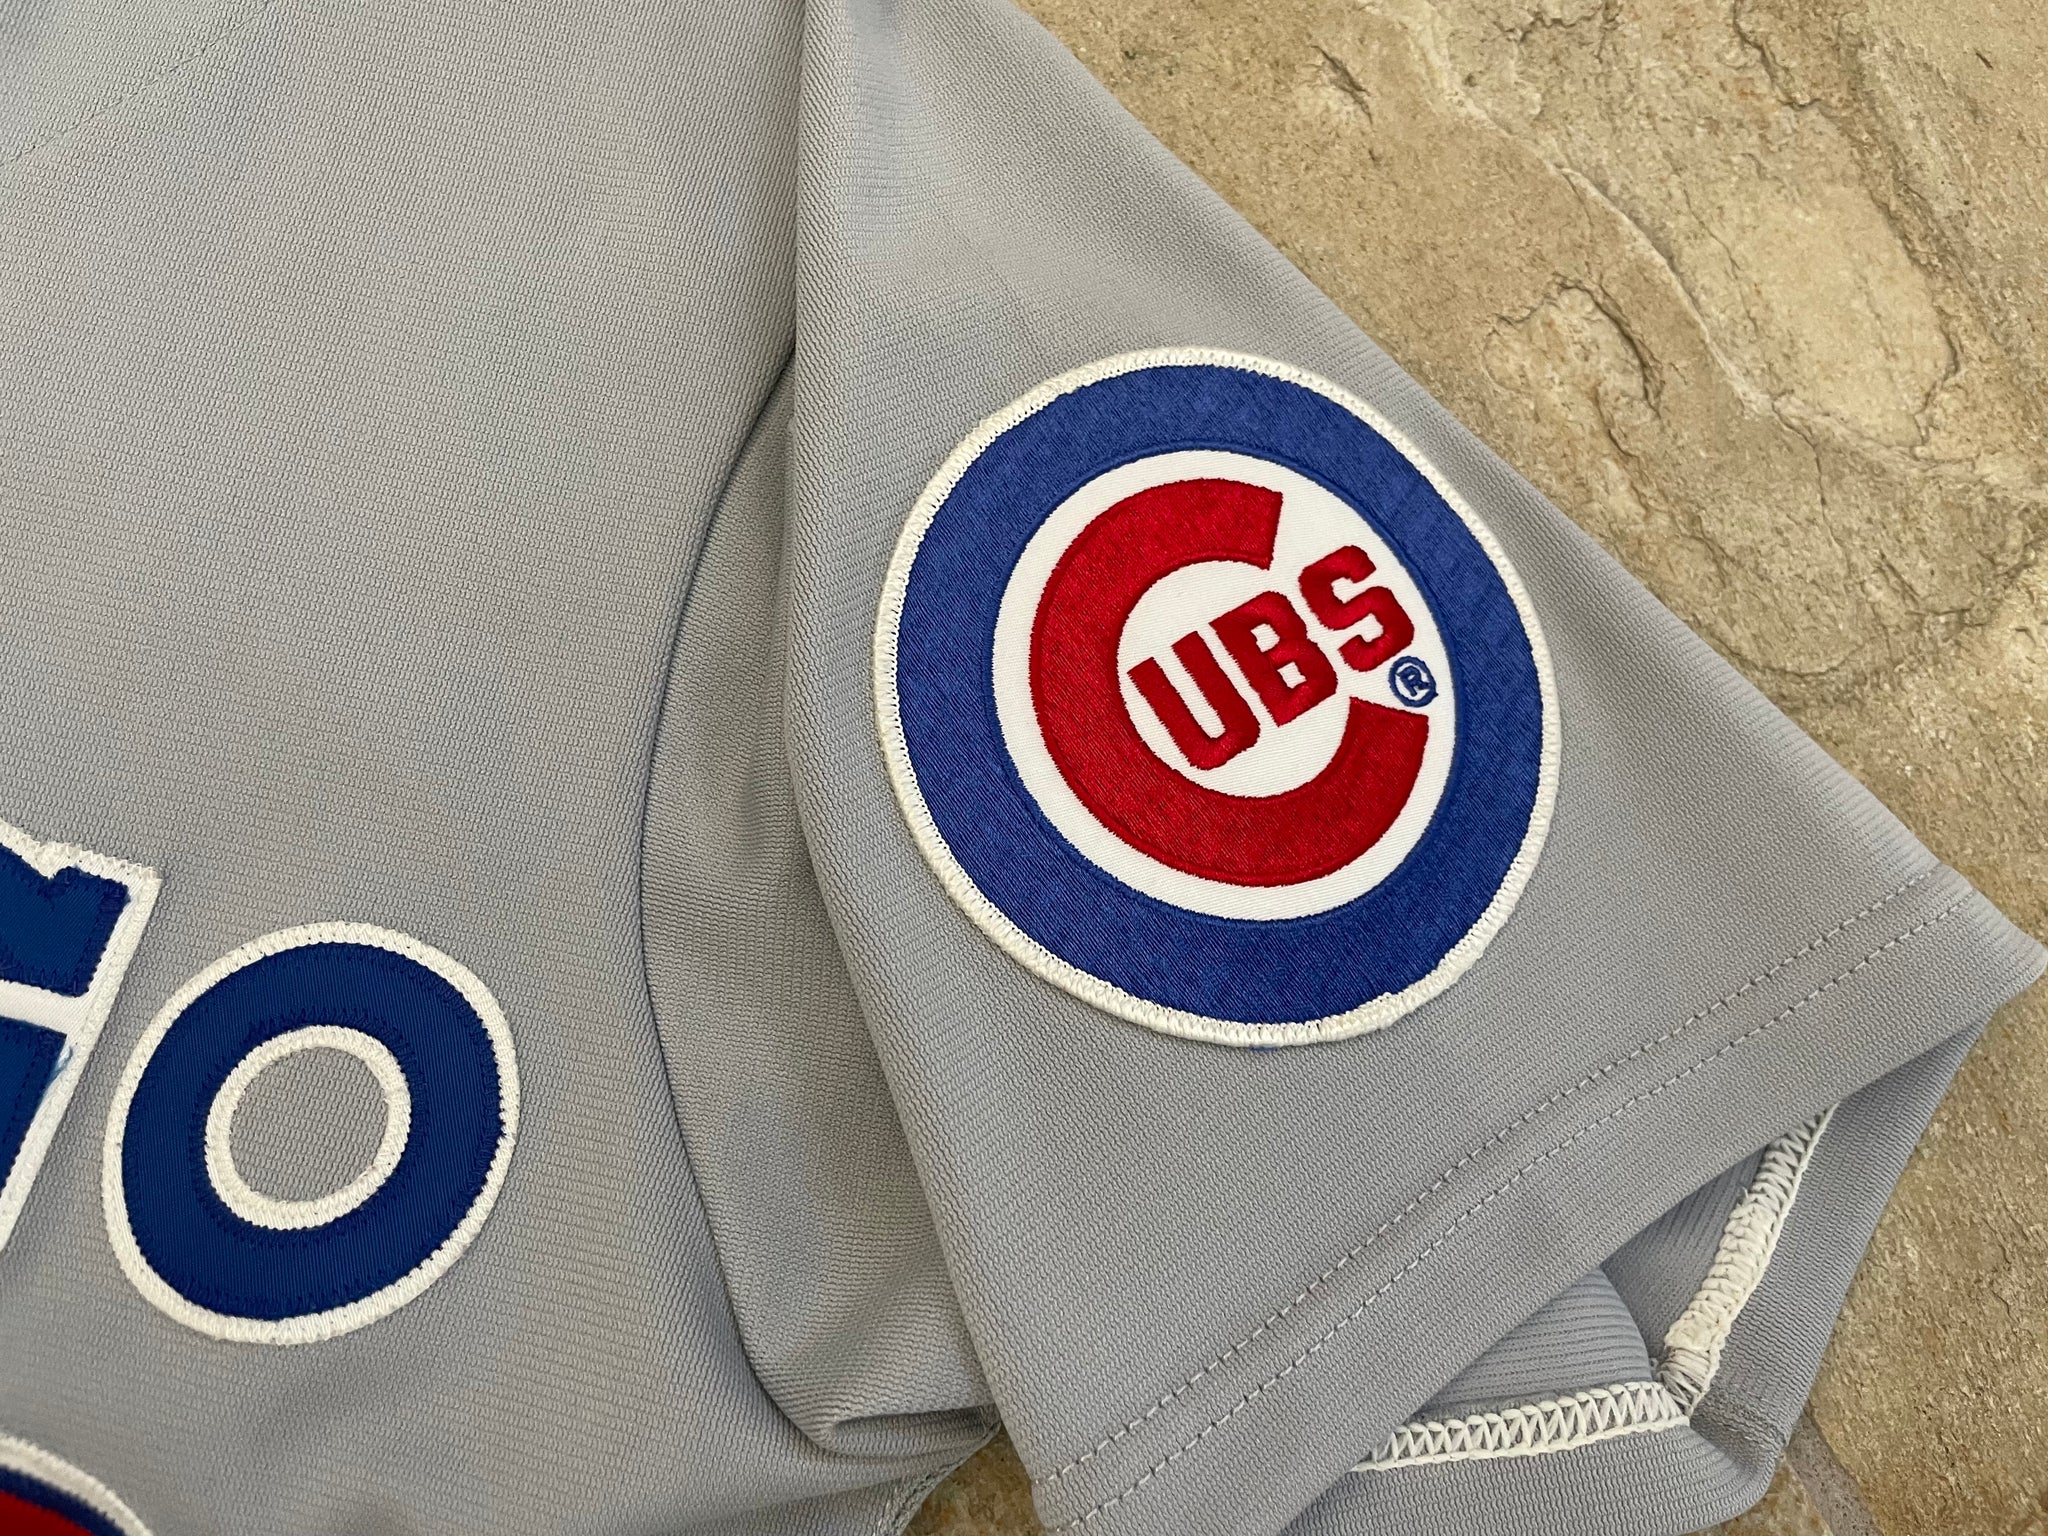 Cubs Jersey Size Large